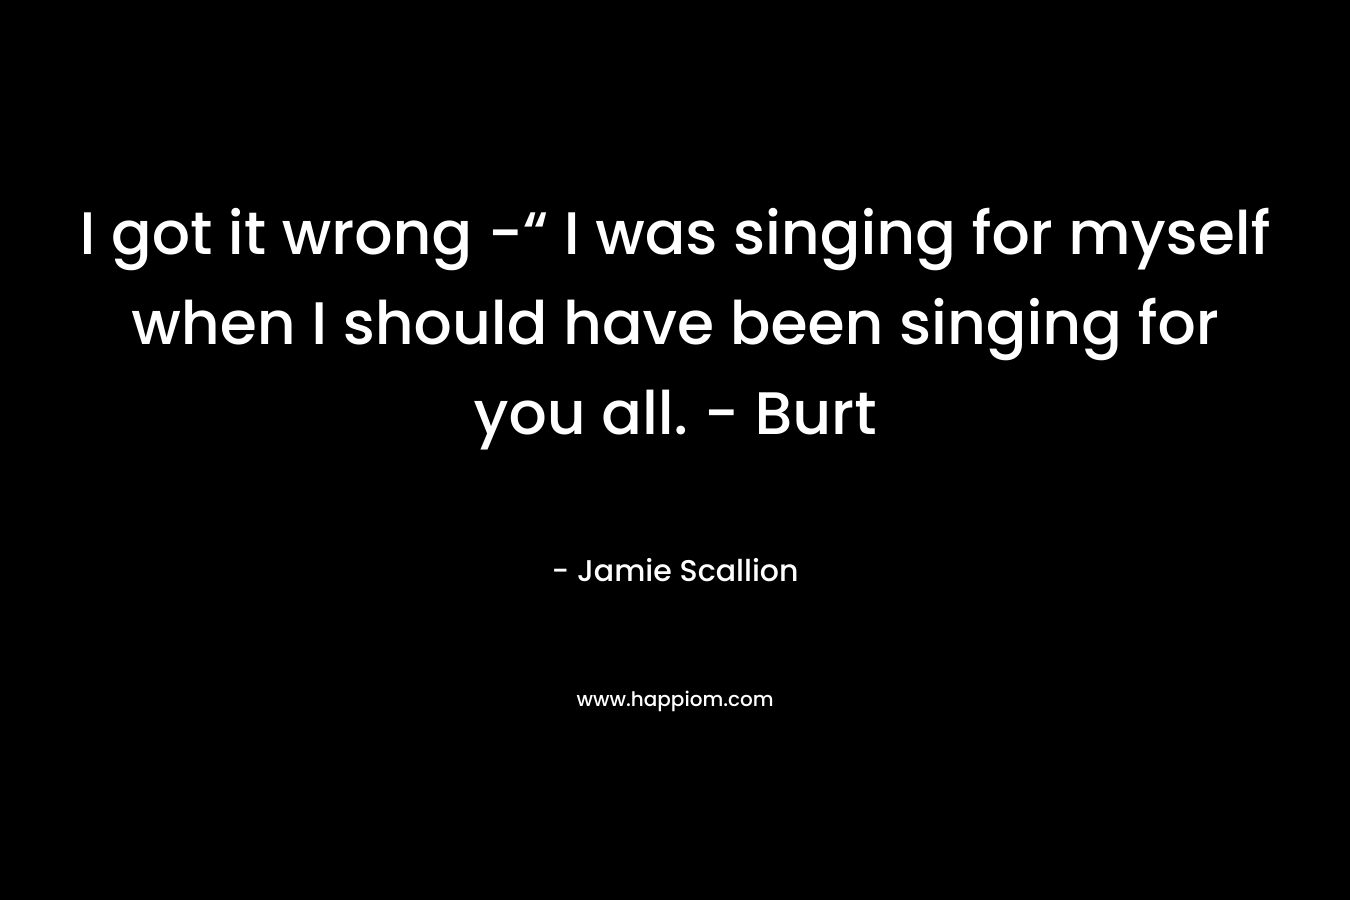 I got it wrong -“ I was singing for myself when I should have been singing for you all. - Burt